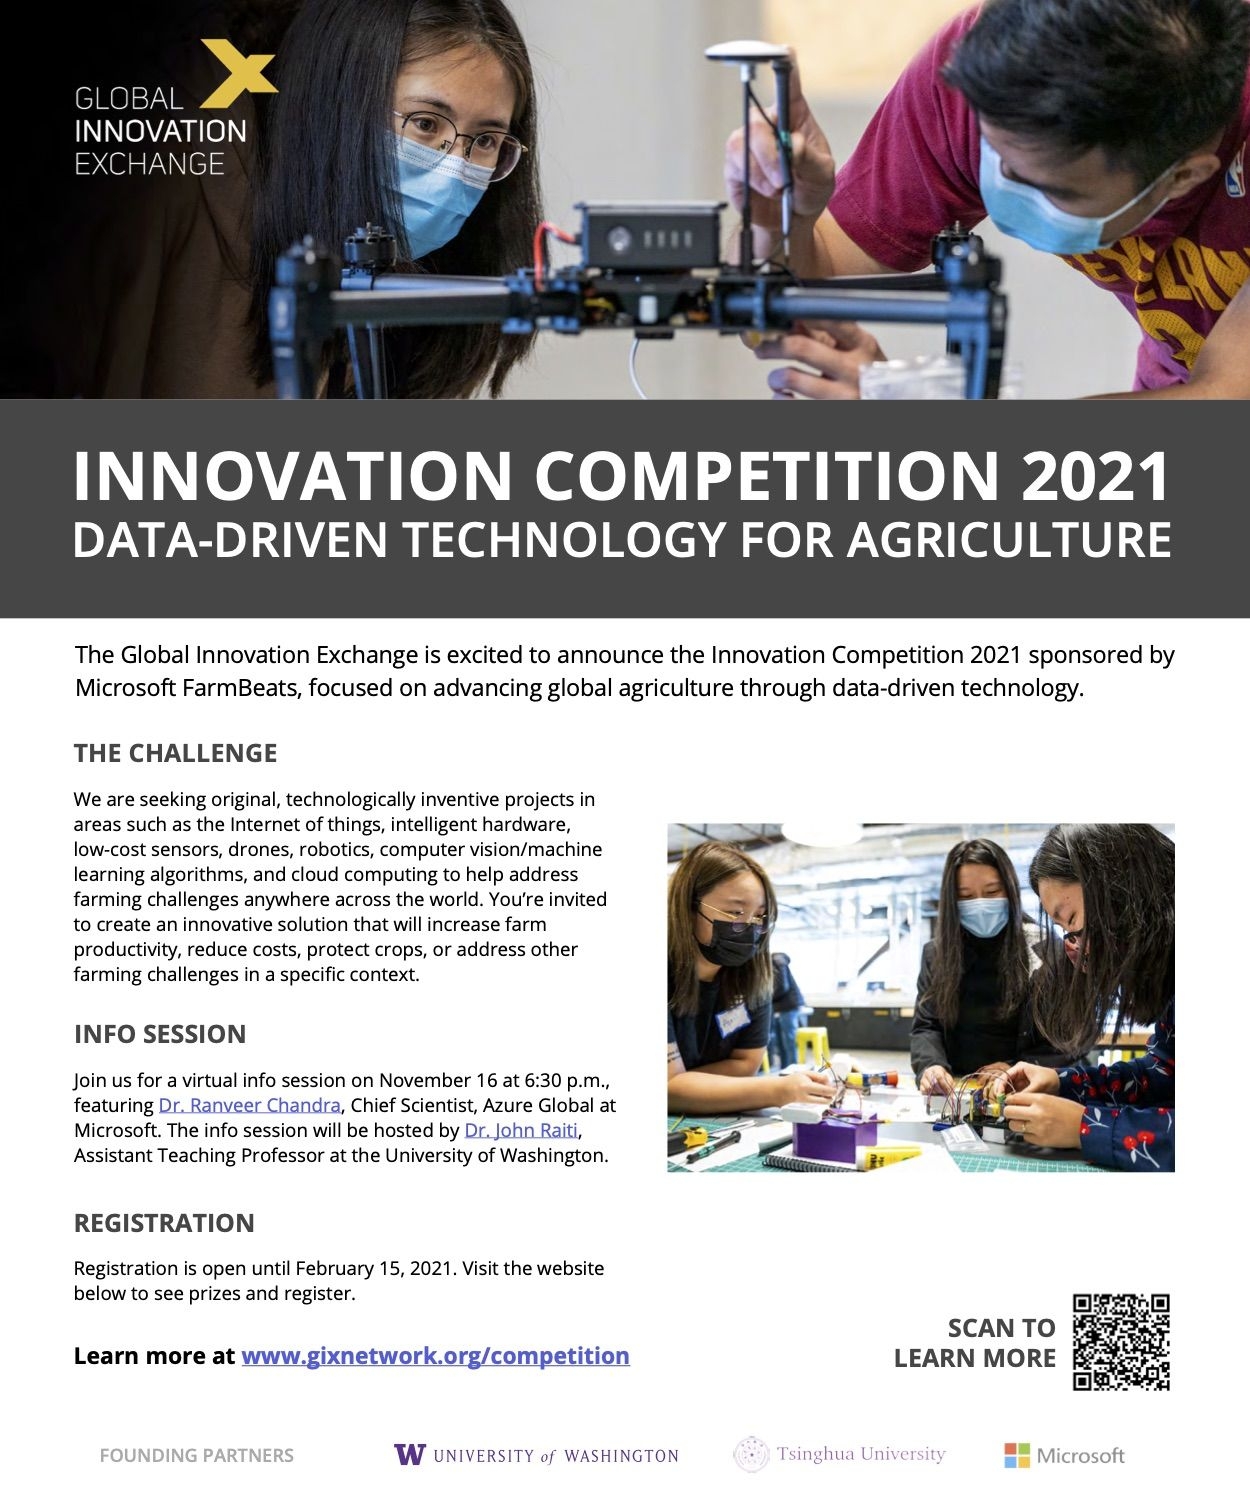 global innovation exchange (gix) innovation competition